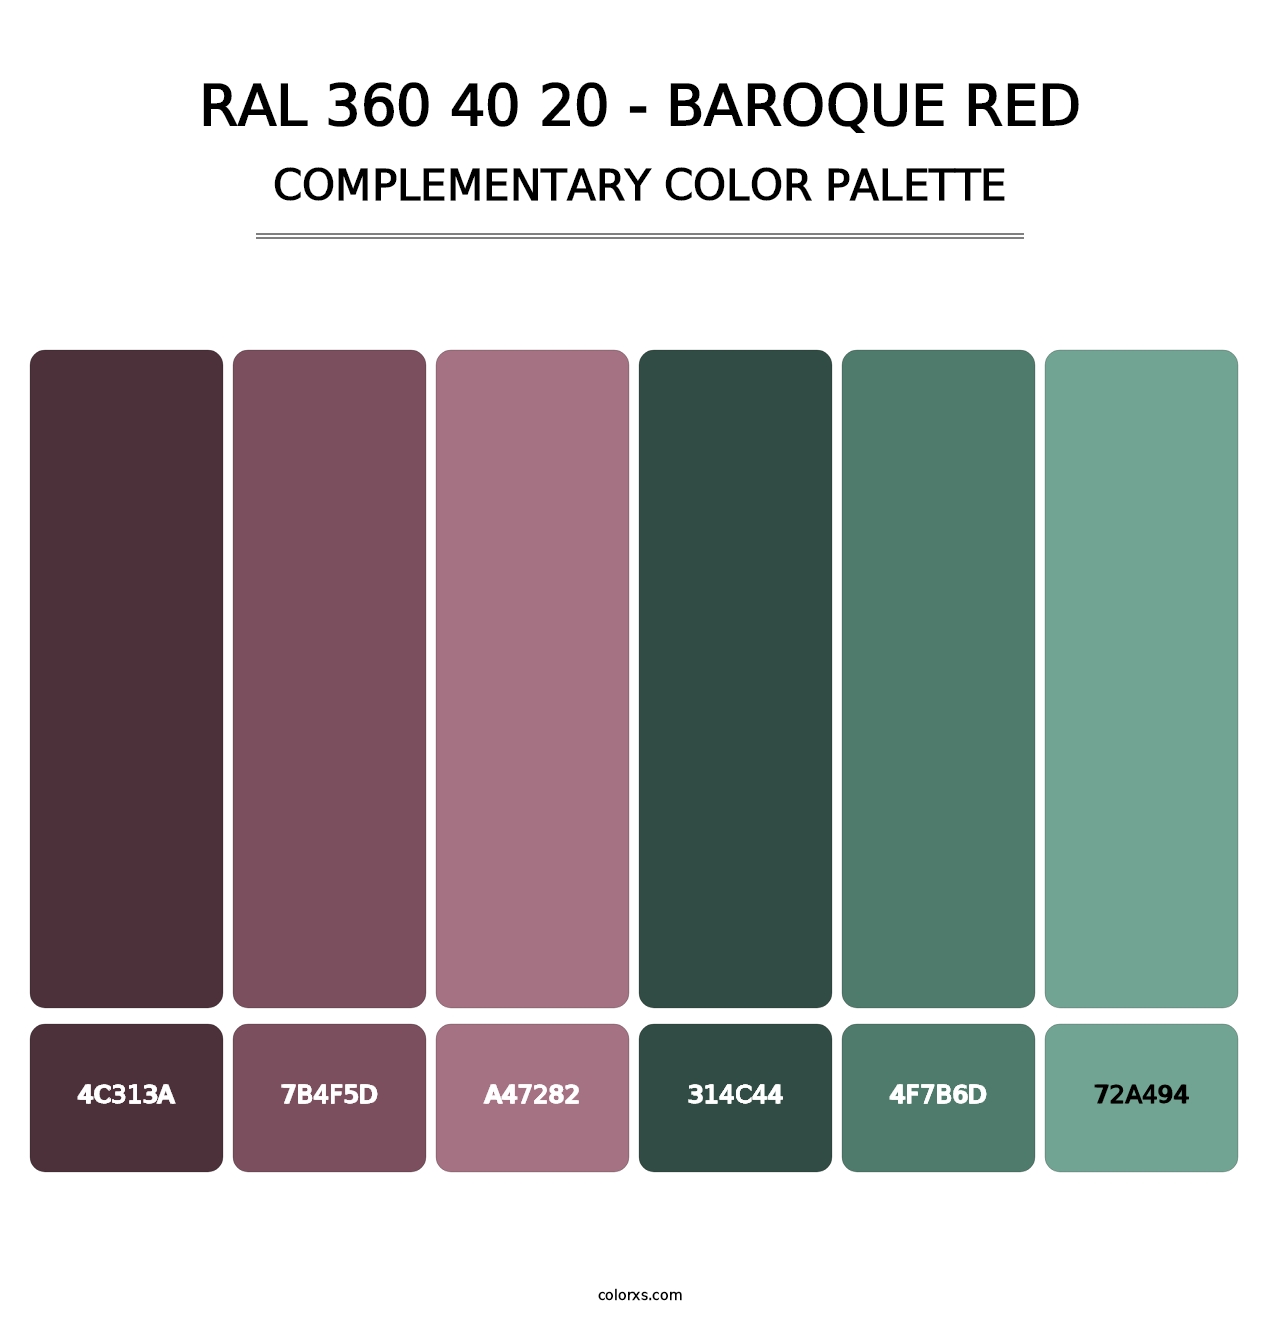 RAL 360 40 20 - Baroque Red - Complementary Color Palette